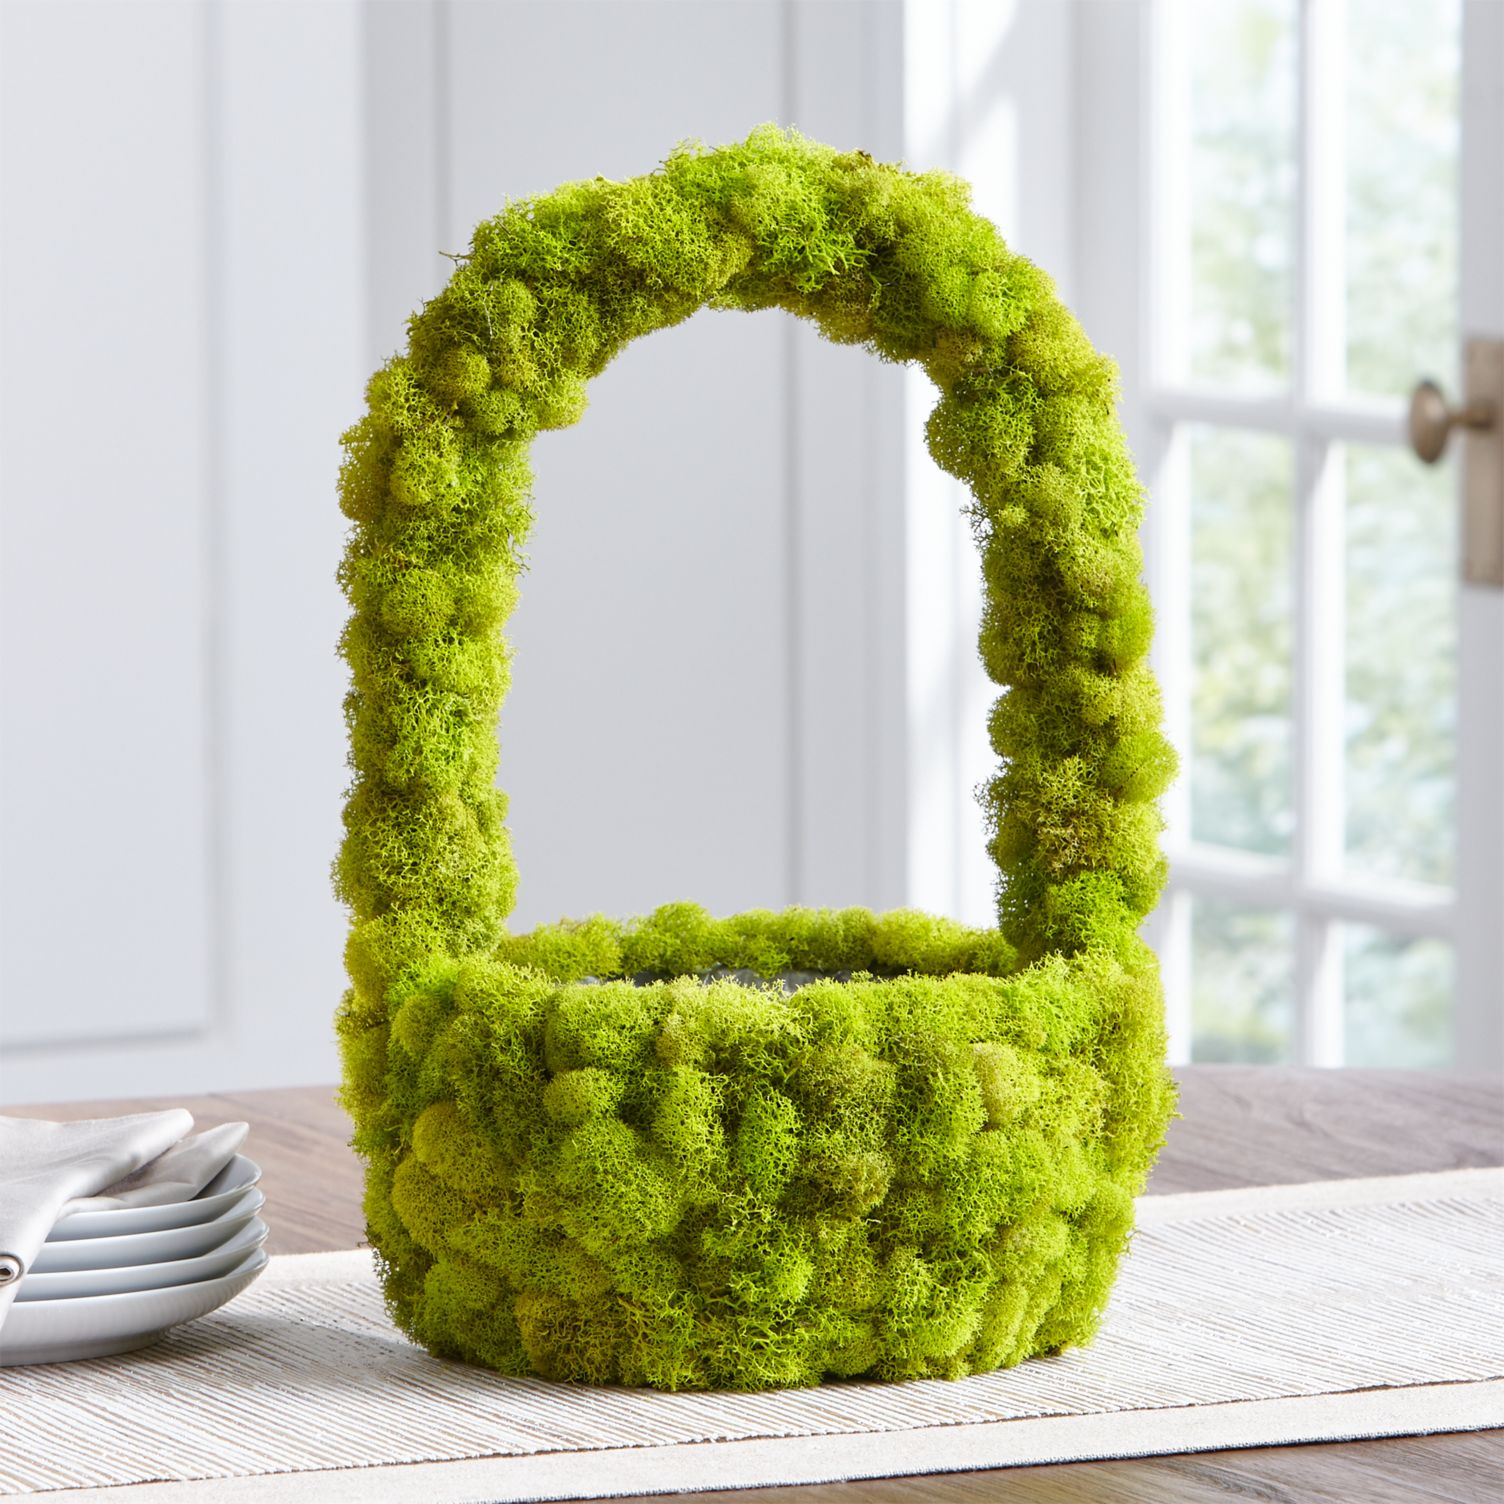 Moss-Easter-basket-from-Crate-Barrel